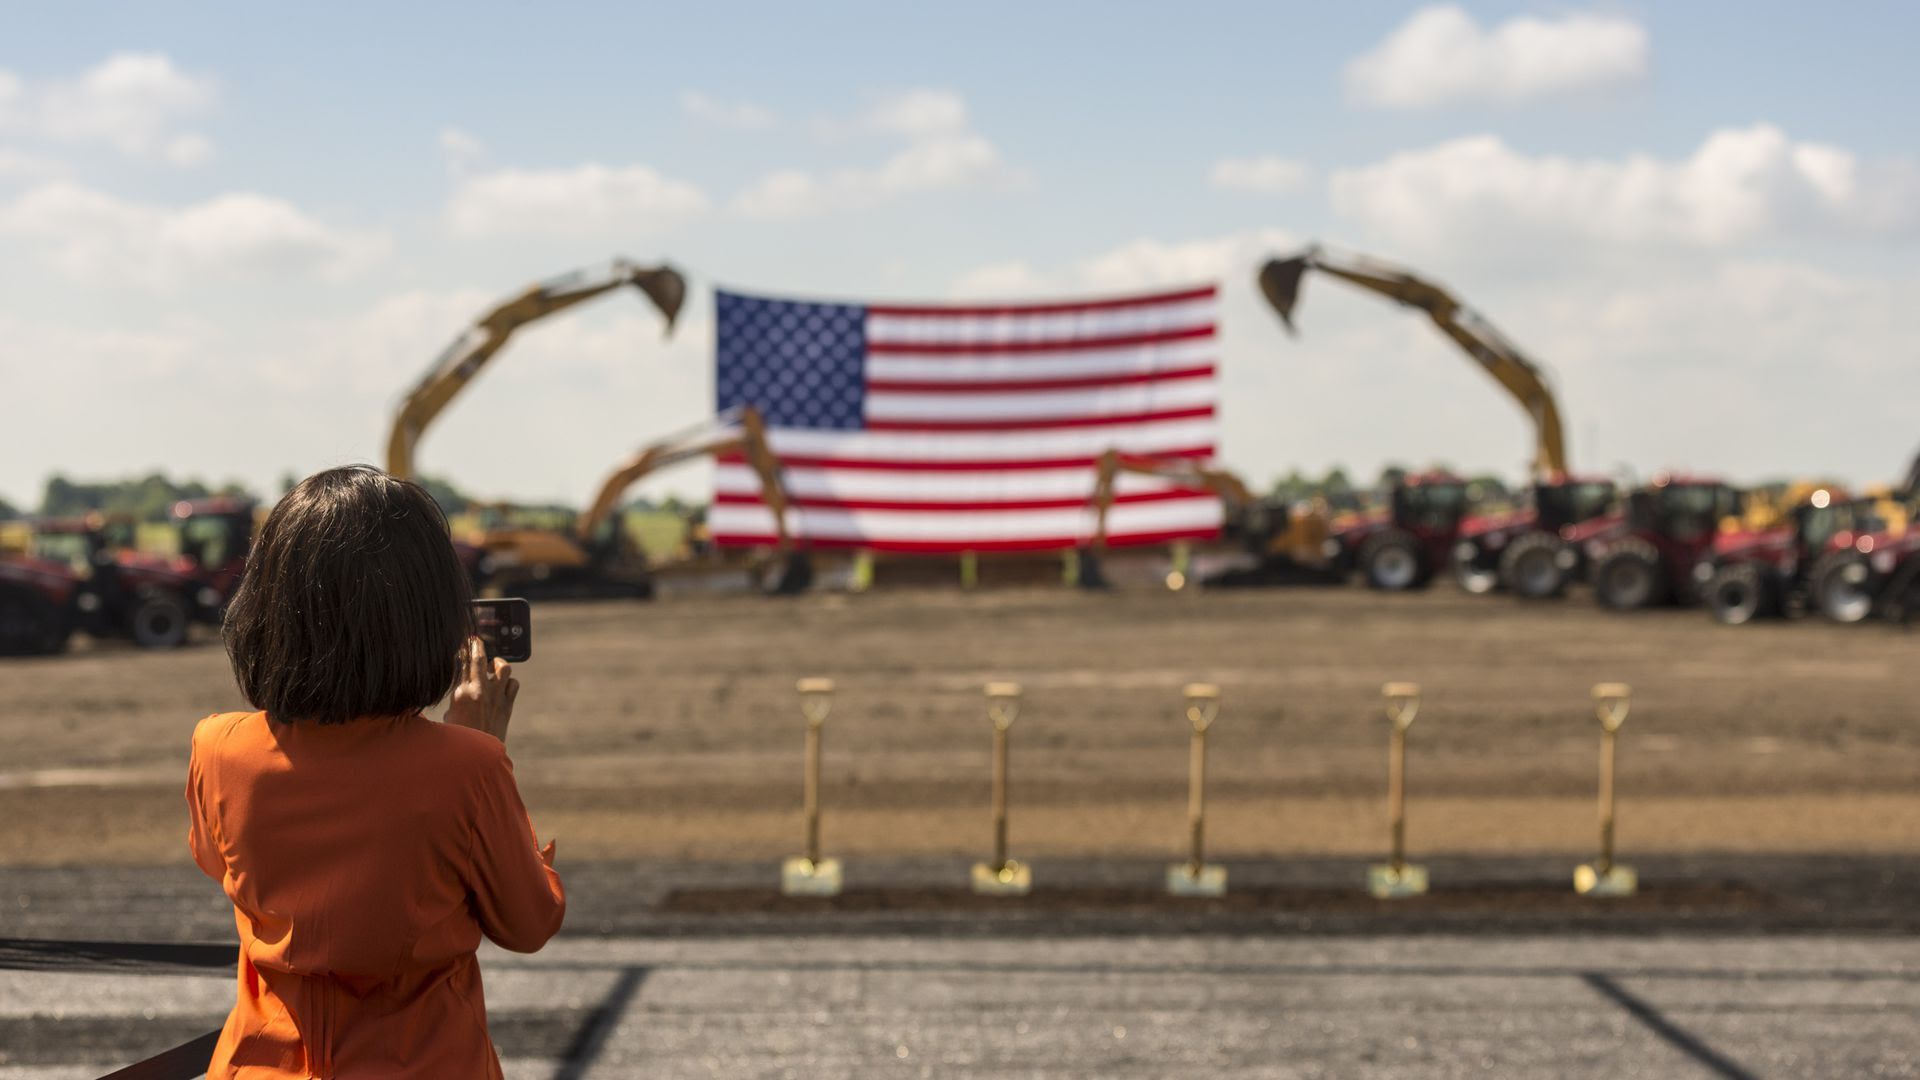 The ground breaking for the Foxconn plant in Mt. Pleasant, Wis., in 2018. Photo: Andy Manis/Getty Images